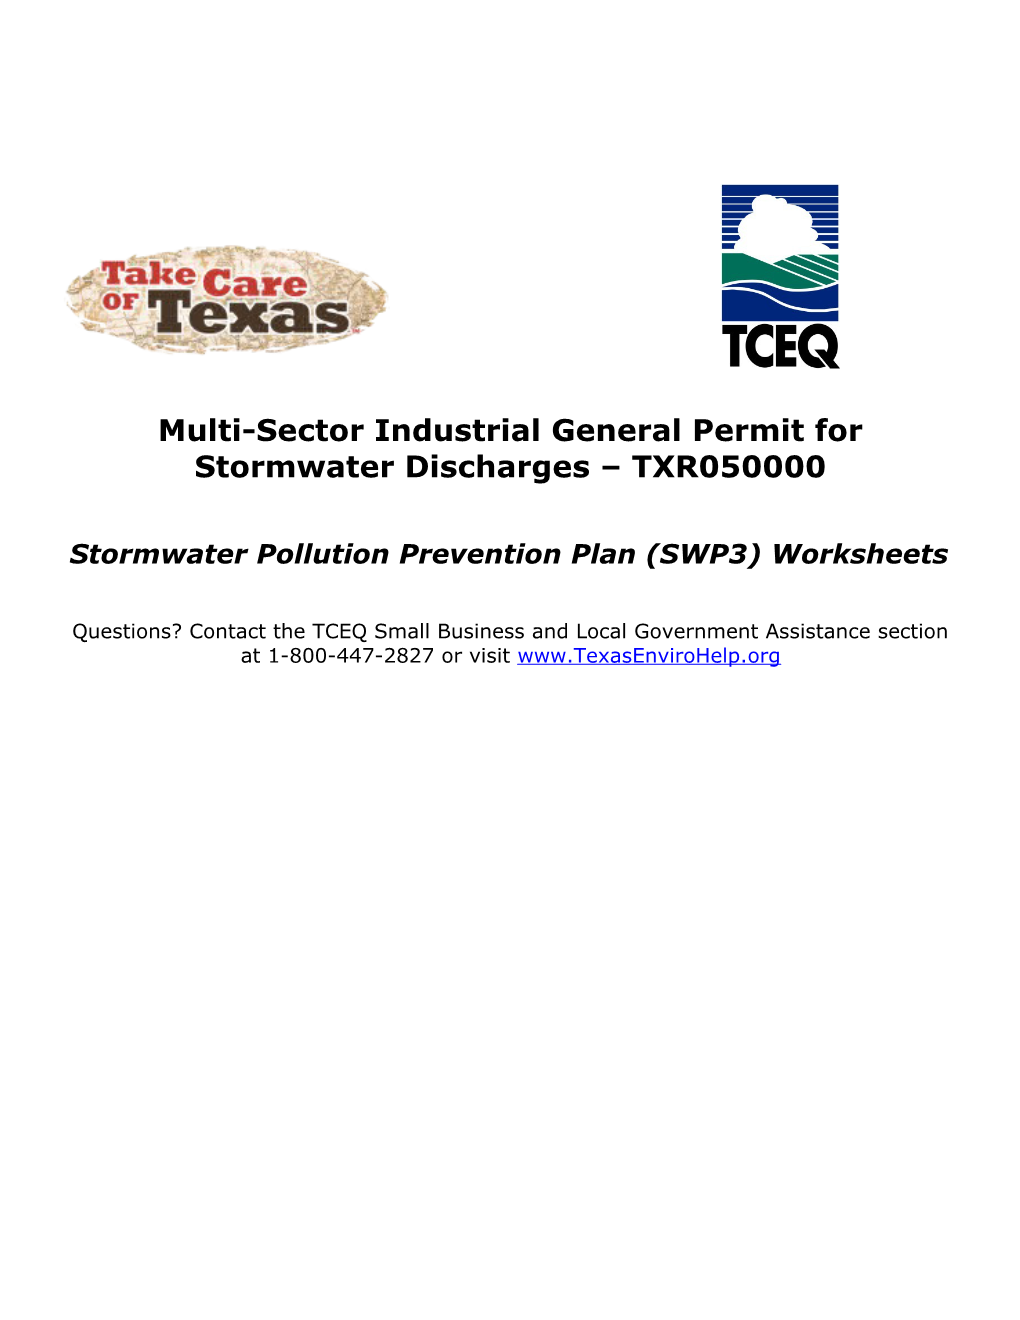 Multi-Sector Industrial General Permit for Stormwater Discharges TXR050000